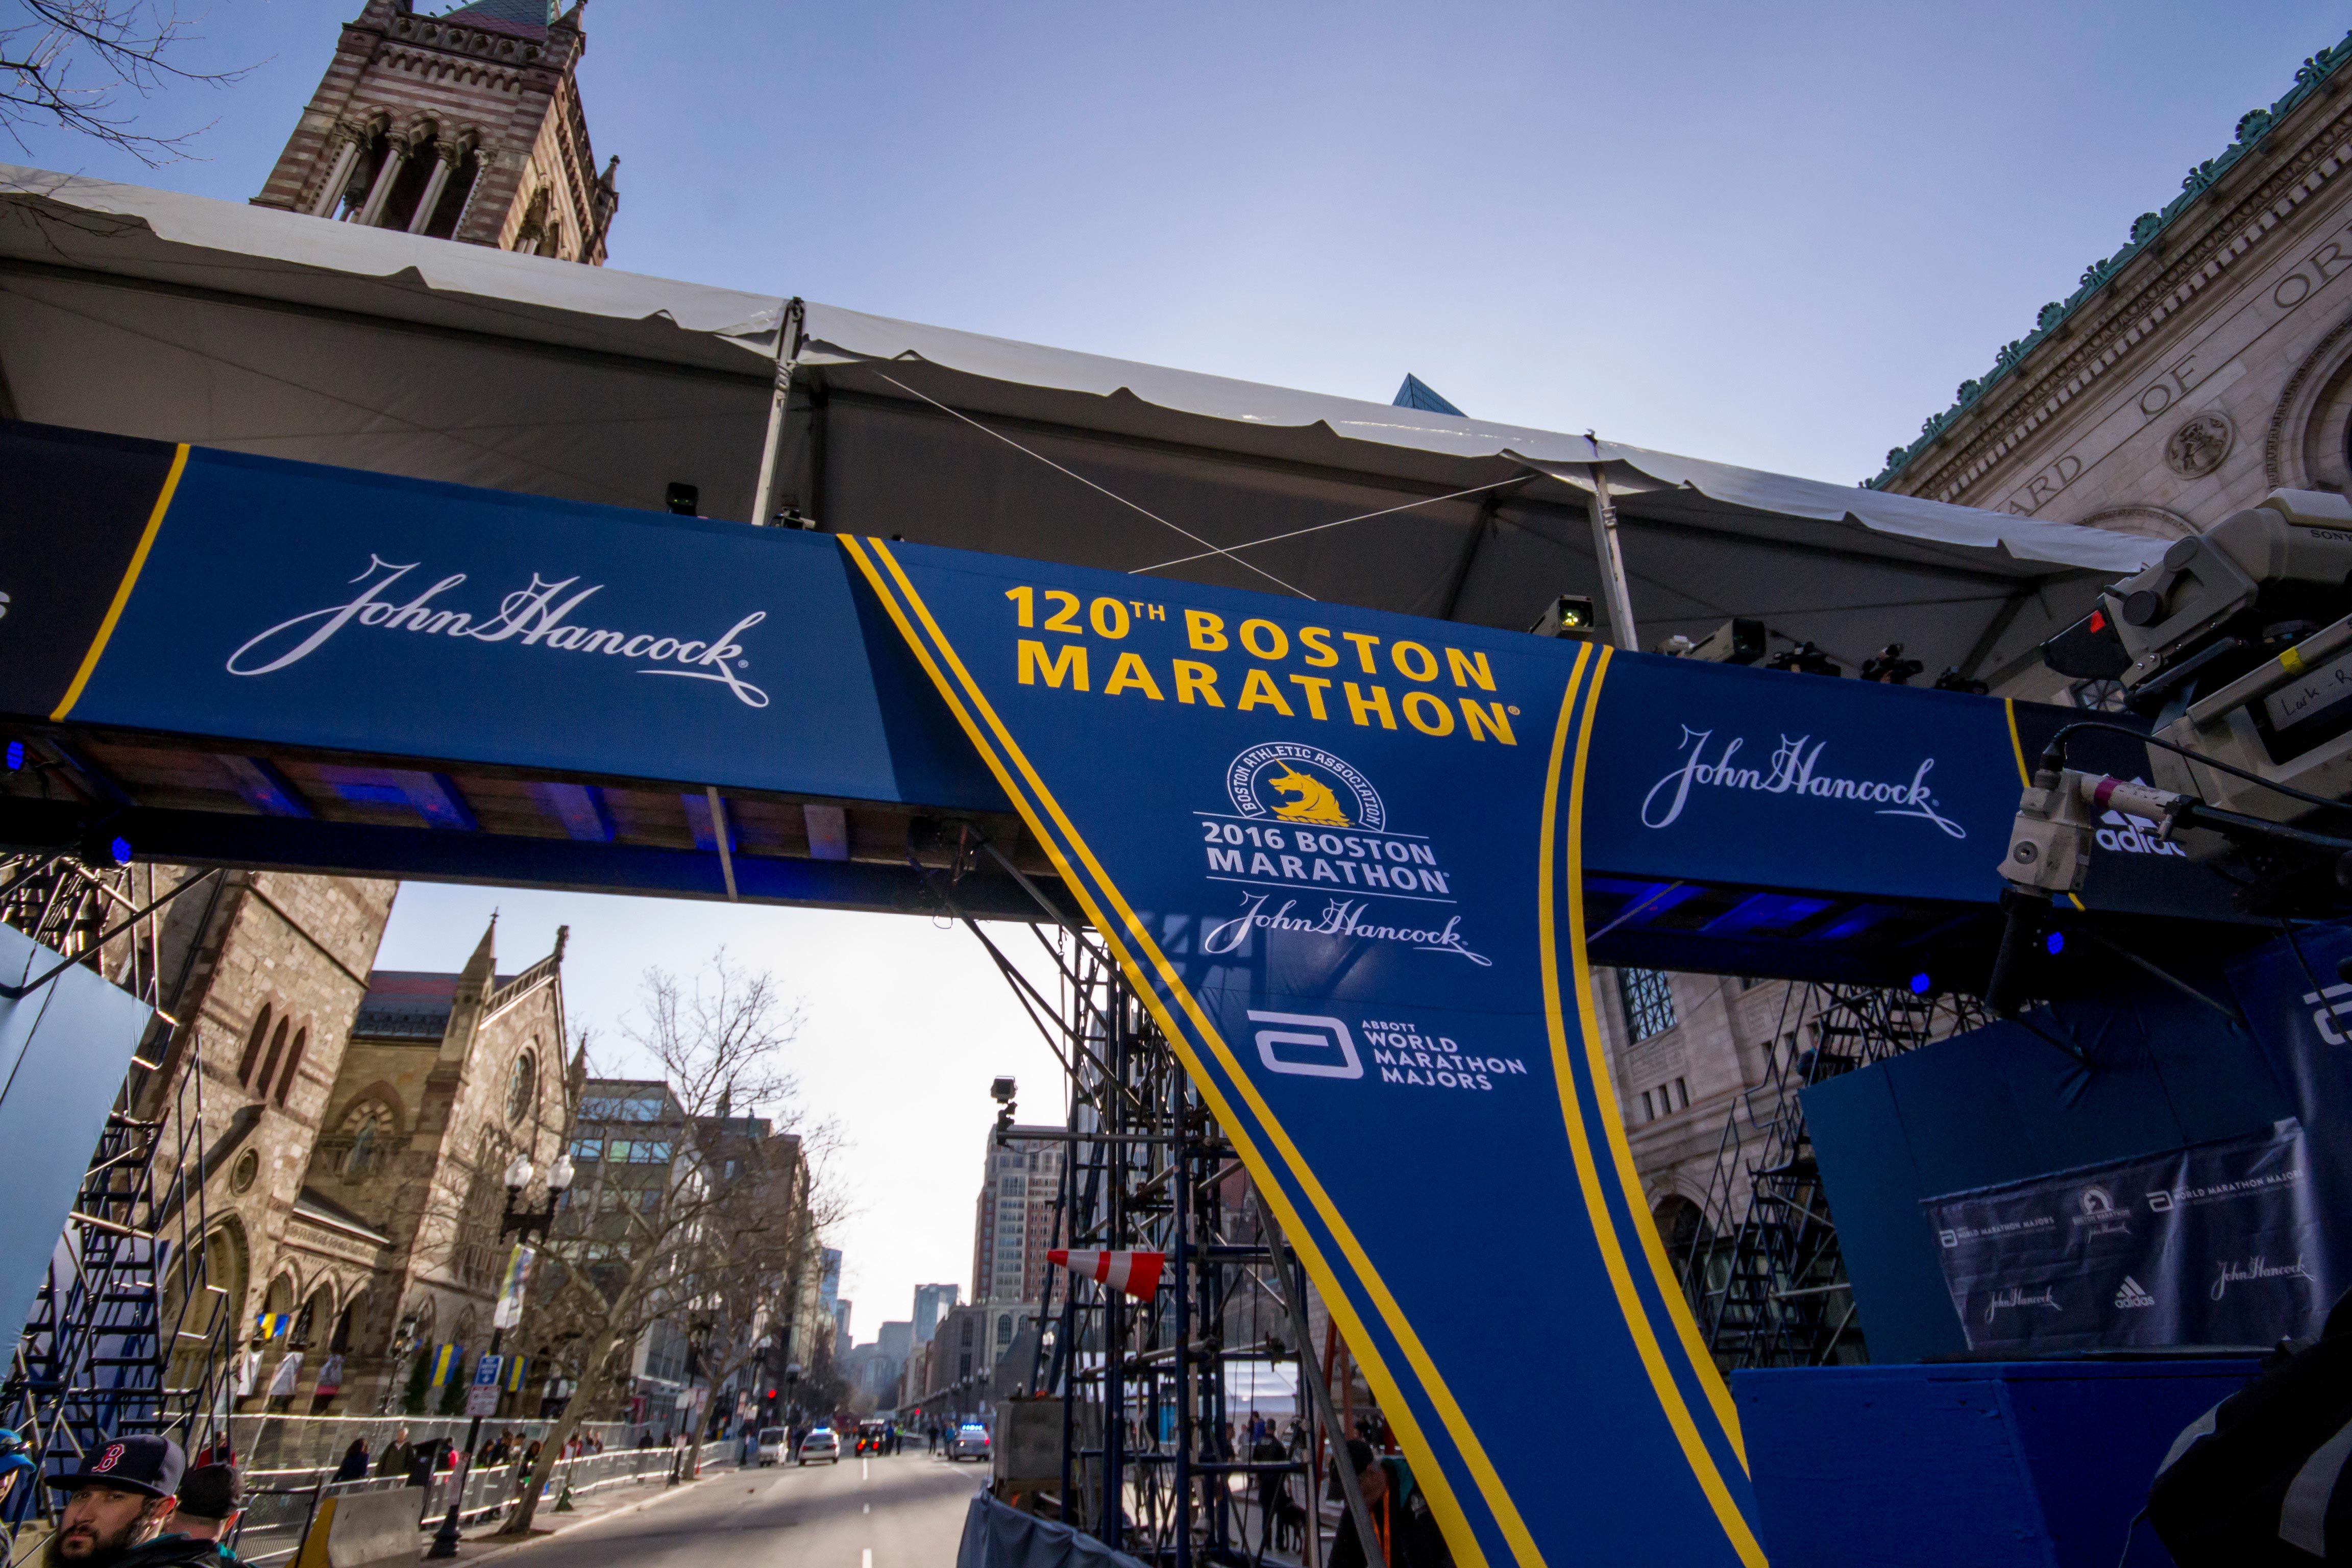 From Strafford to Boston, AMI Lends a Hand at the 120th Boston Marathon